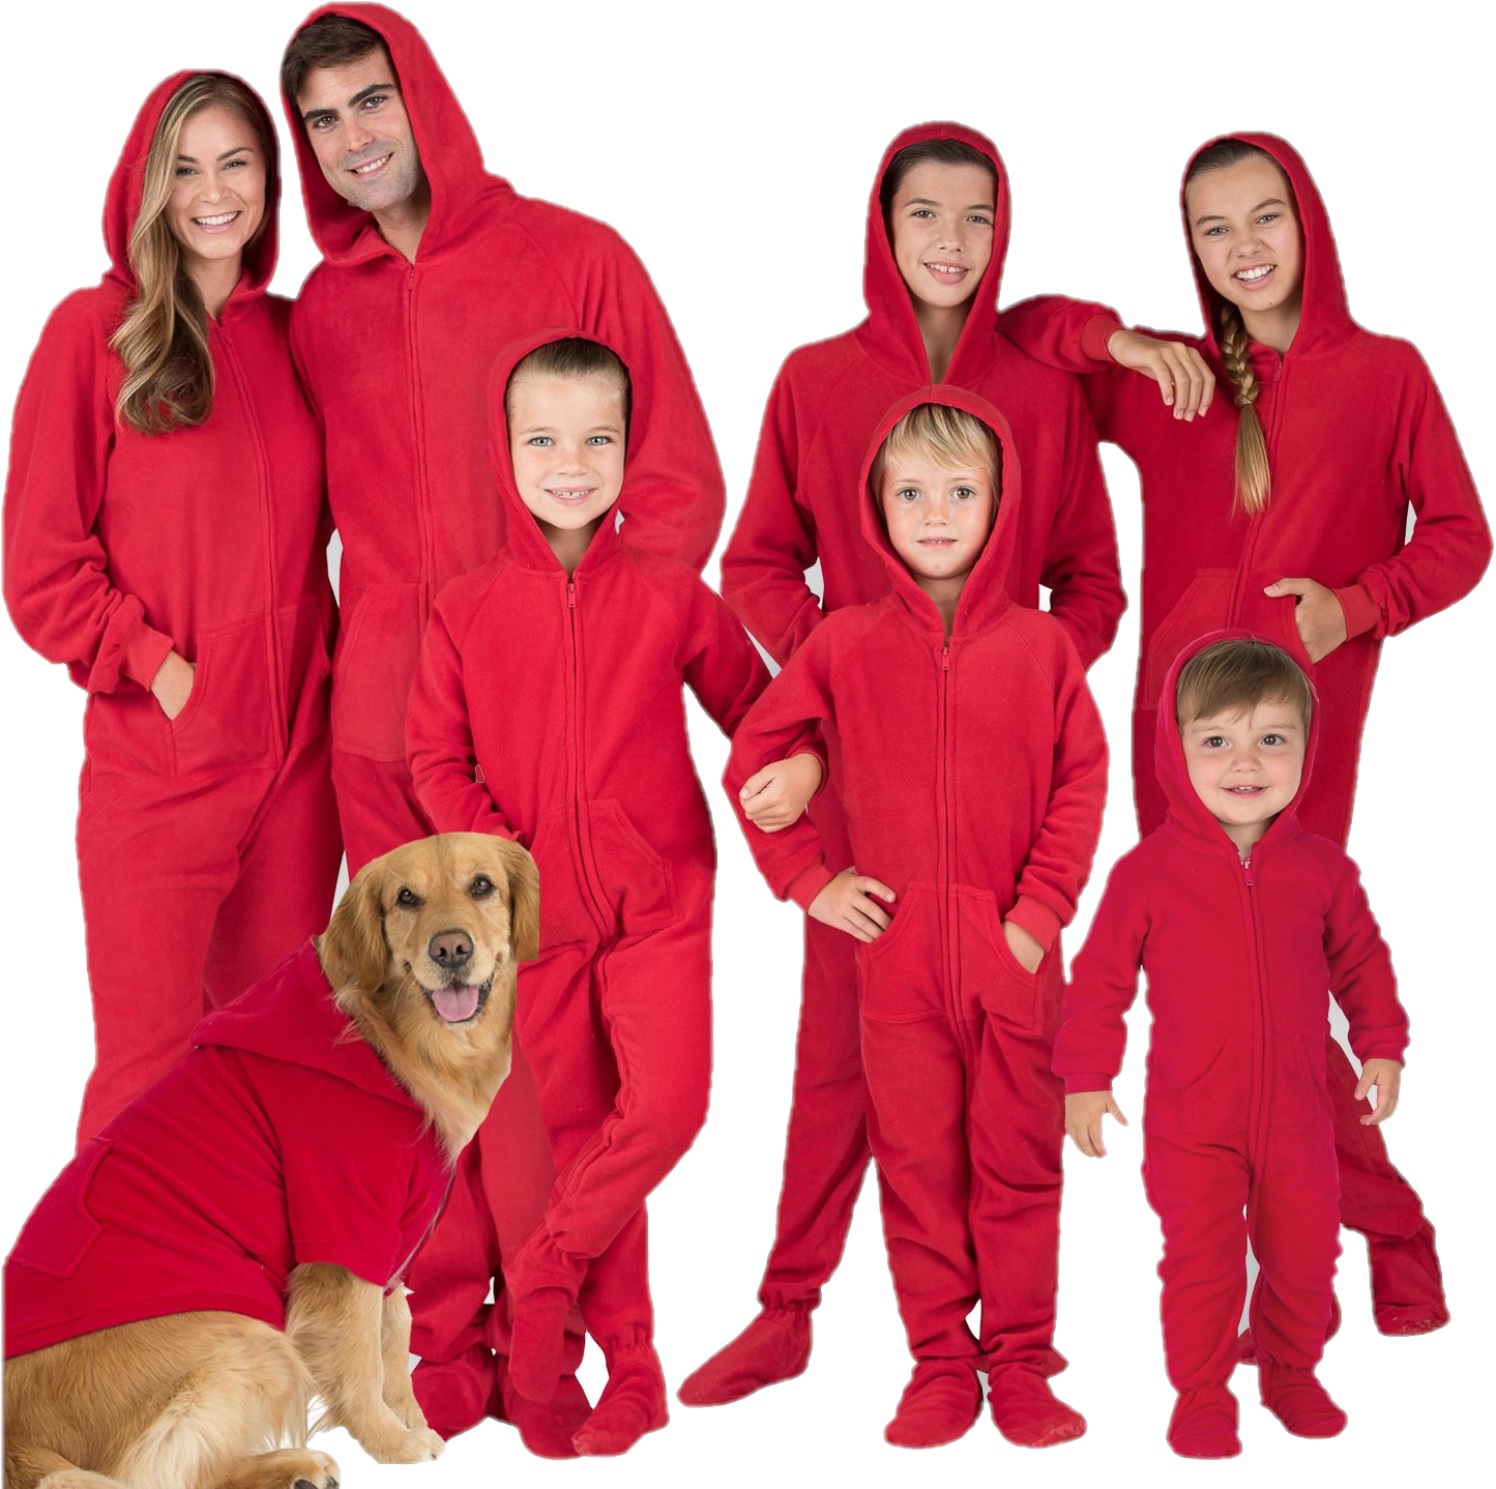 Footed Pajamas - Family Matching Chilli Red Hoodie One Pieces for Boys, Girls, Men, Women and Pets - Adult - Medium Plus/Wide (Fits 5'8 - 5'11") - image 1 of 7